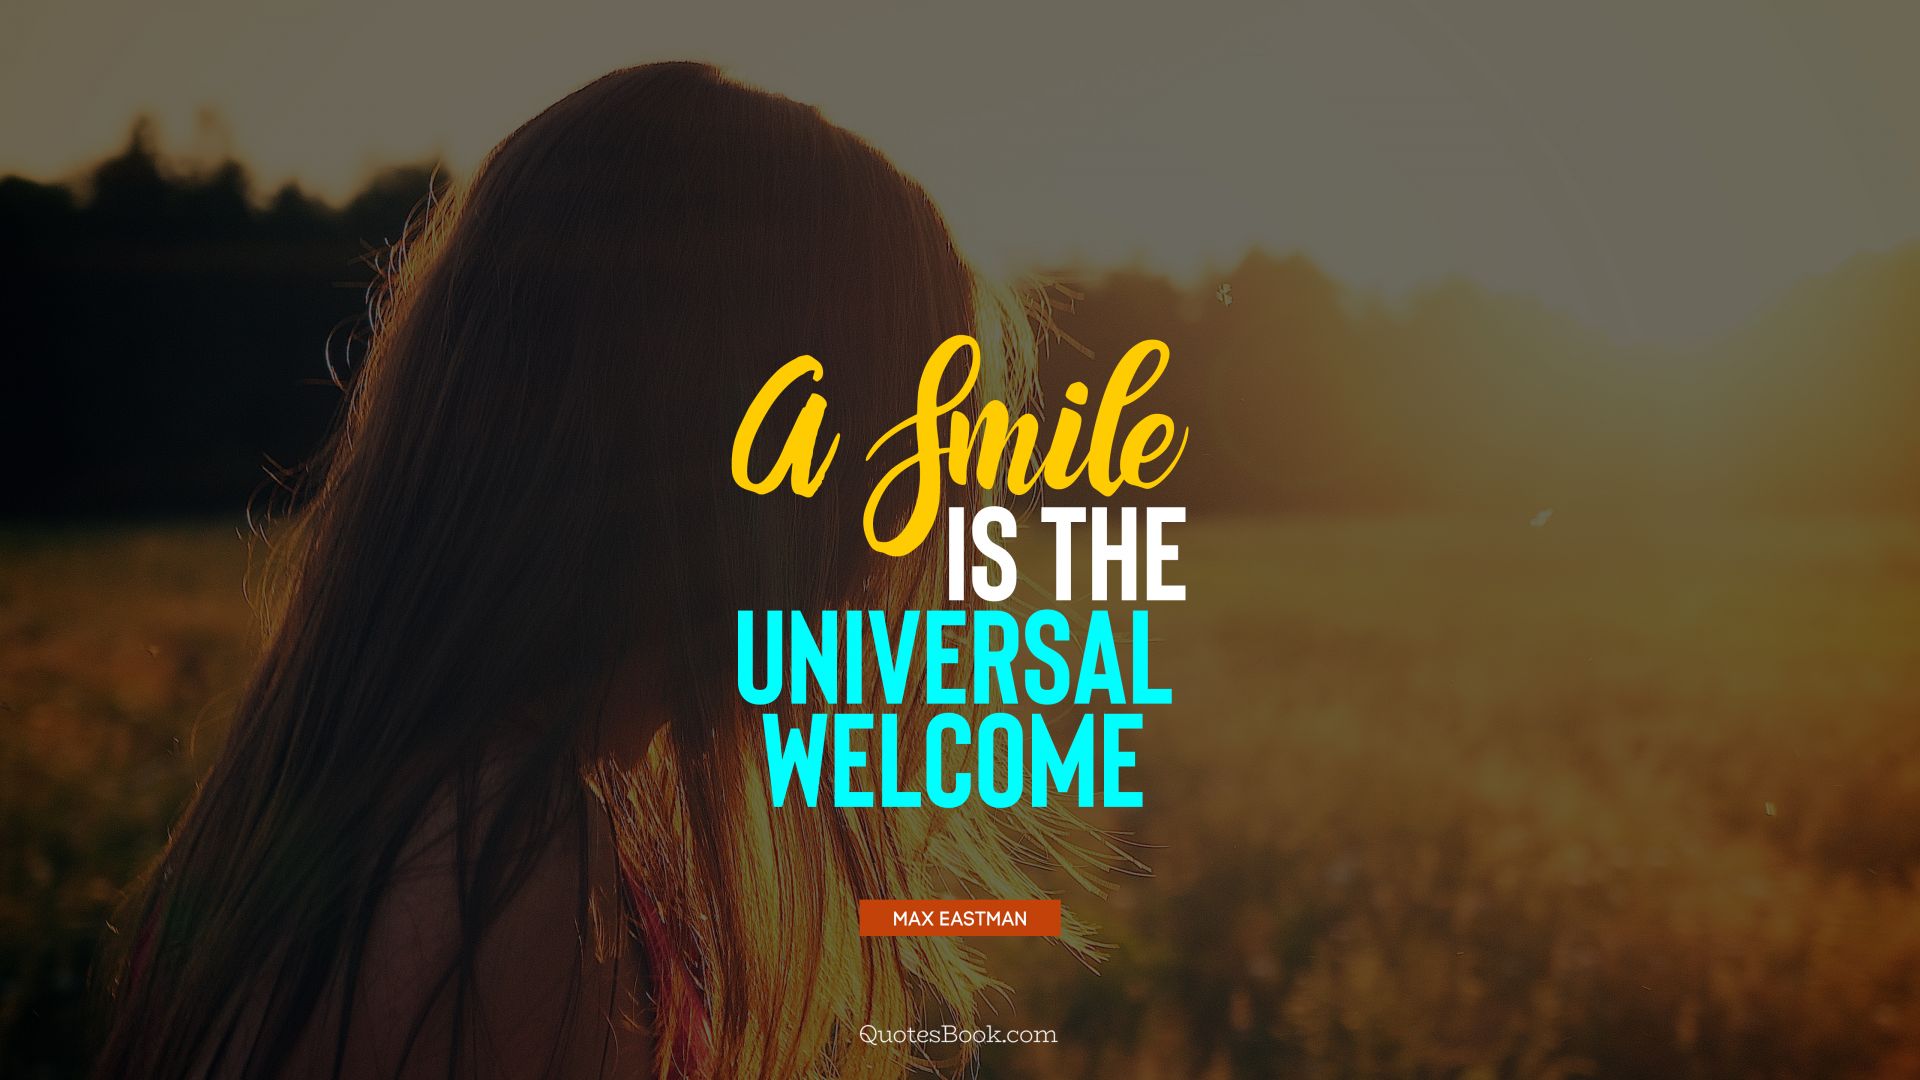 A smile is the universal welcome. - Quote by Max Eastman